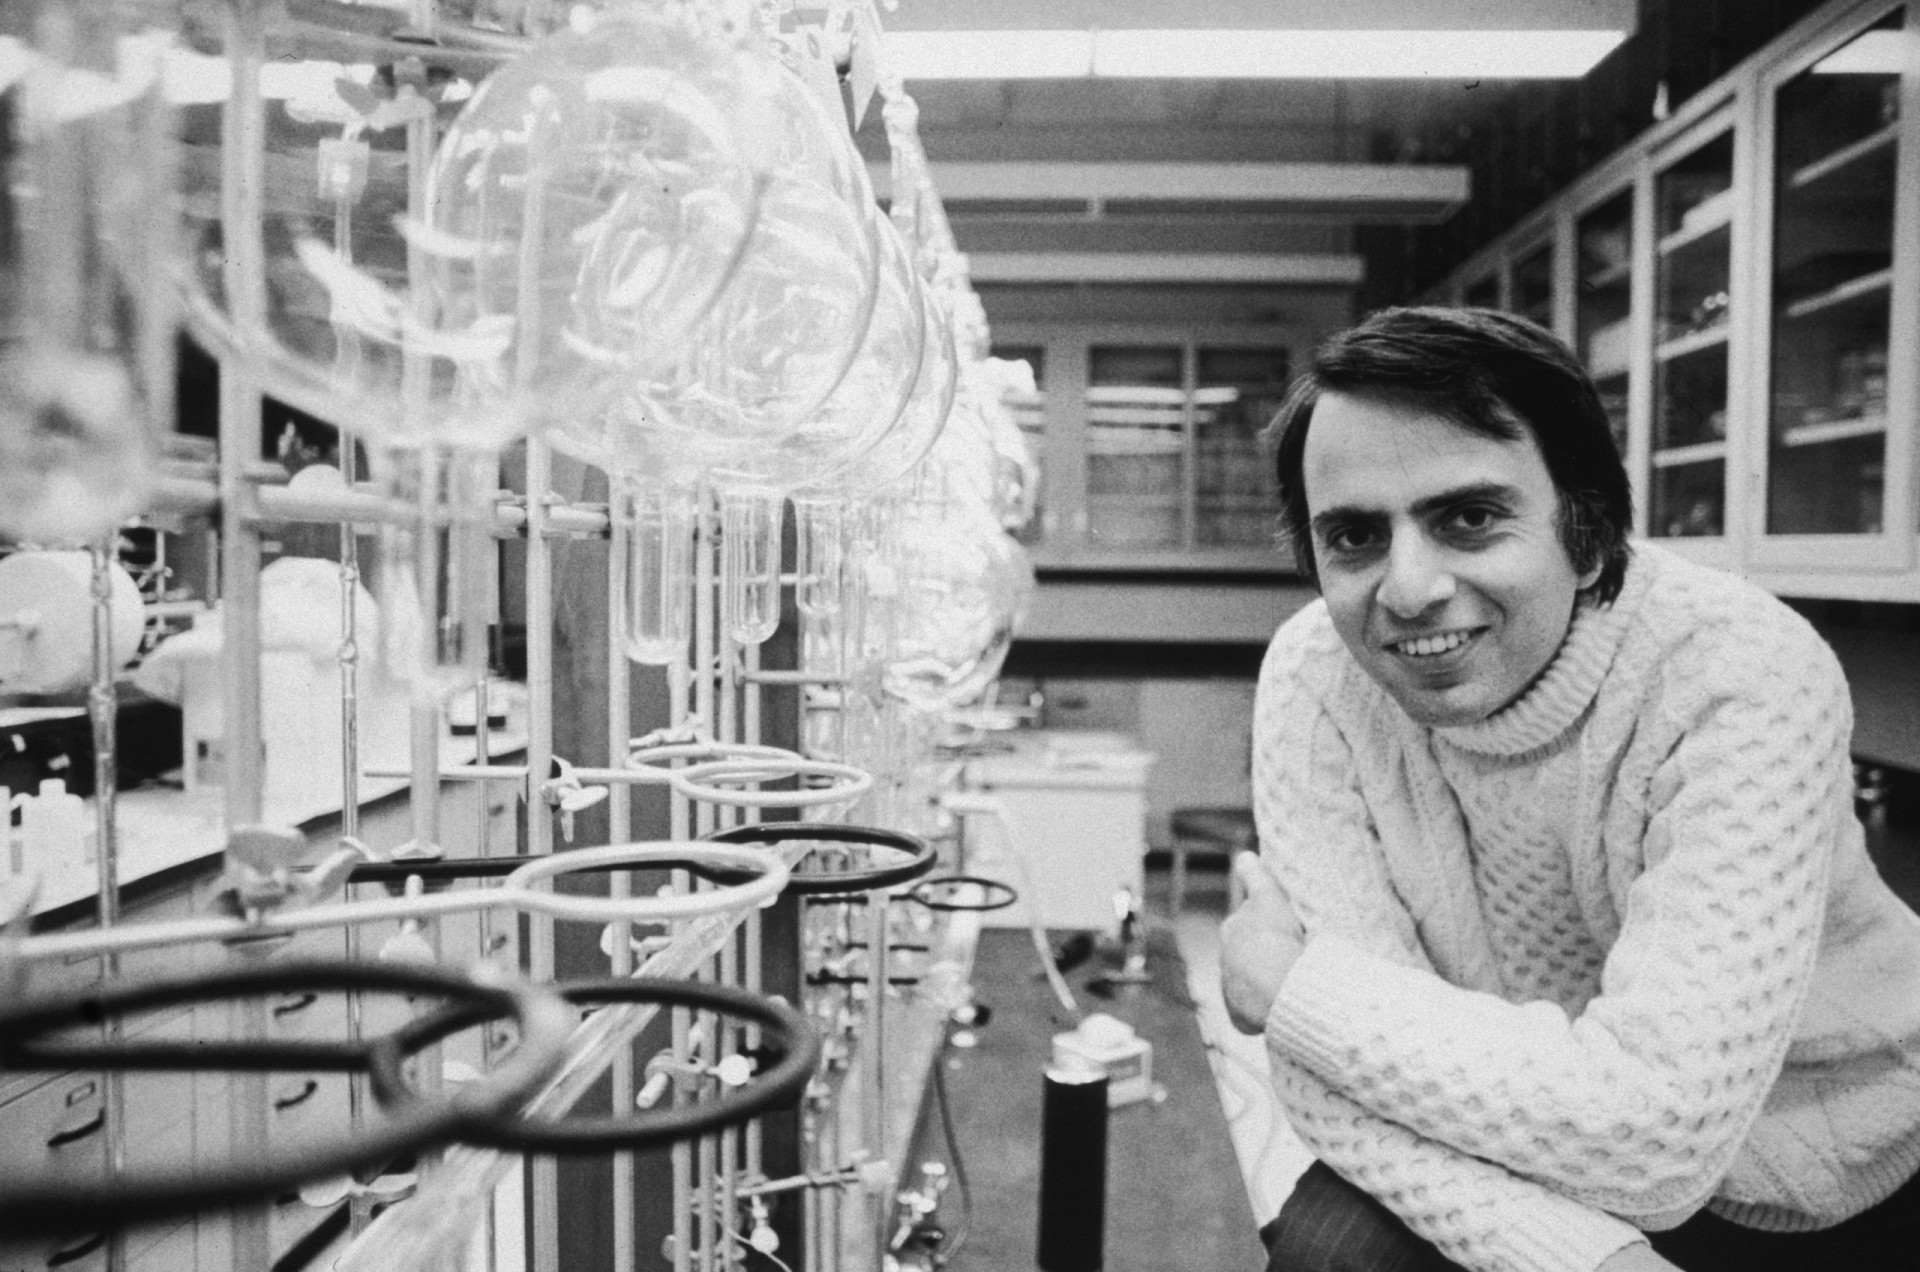 <p>The late American astronomer and planetary scientist Carl Sagan was also involved in the project.</p><p><a href="https://www.msn.com/en-ph/community/channel/vid-7xx8mnucu55yw63we9va2gwr7uihbxwc68fxqp25x6tg4ftibpra?cvid=94631541bc0f4f89bfd59158d696ad7e">Follow us and access great exclusive content every day</a></p>